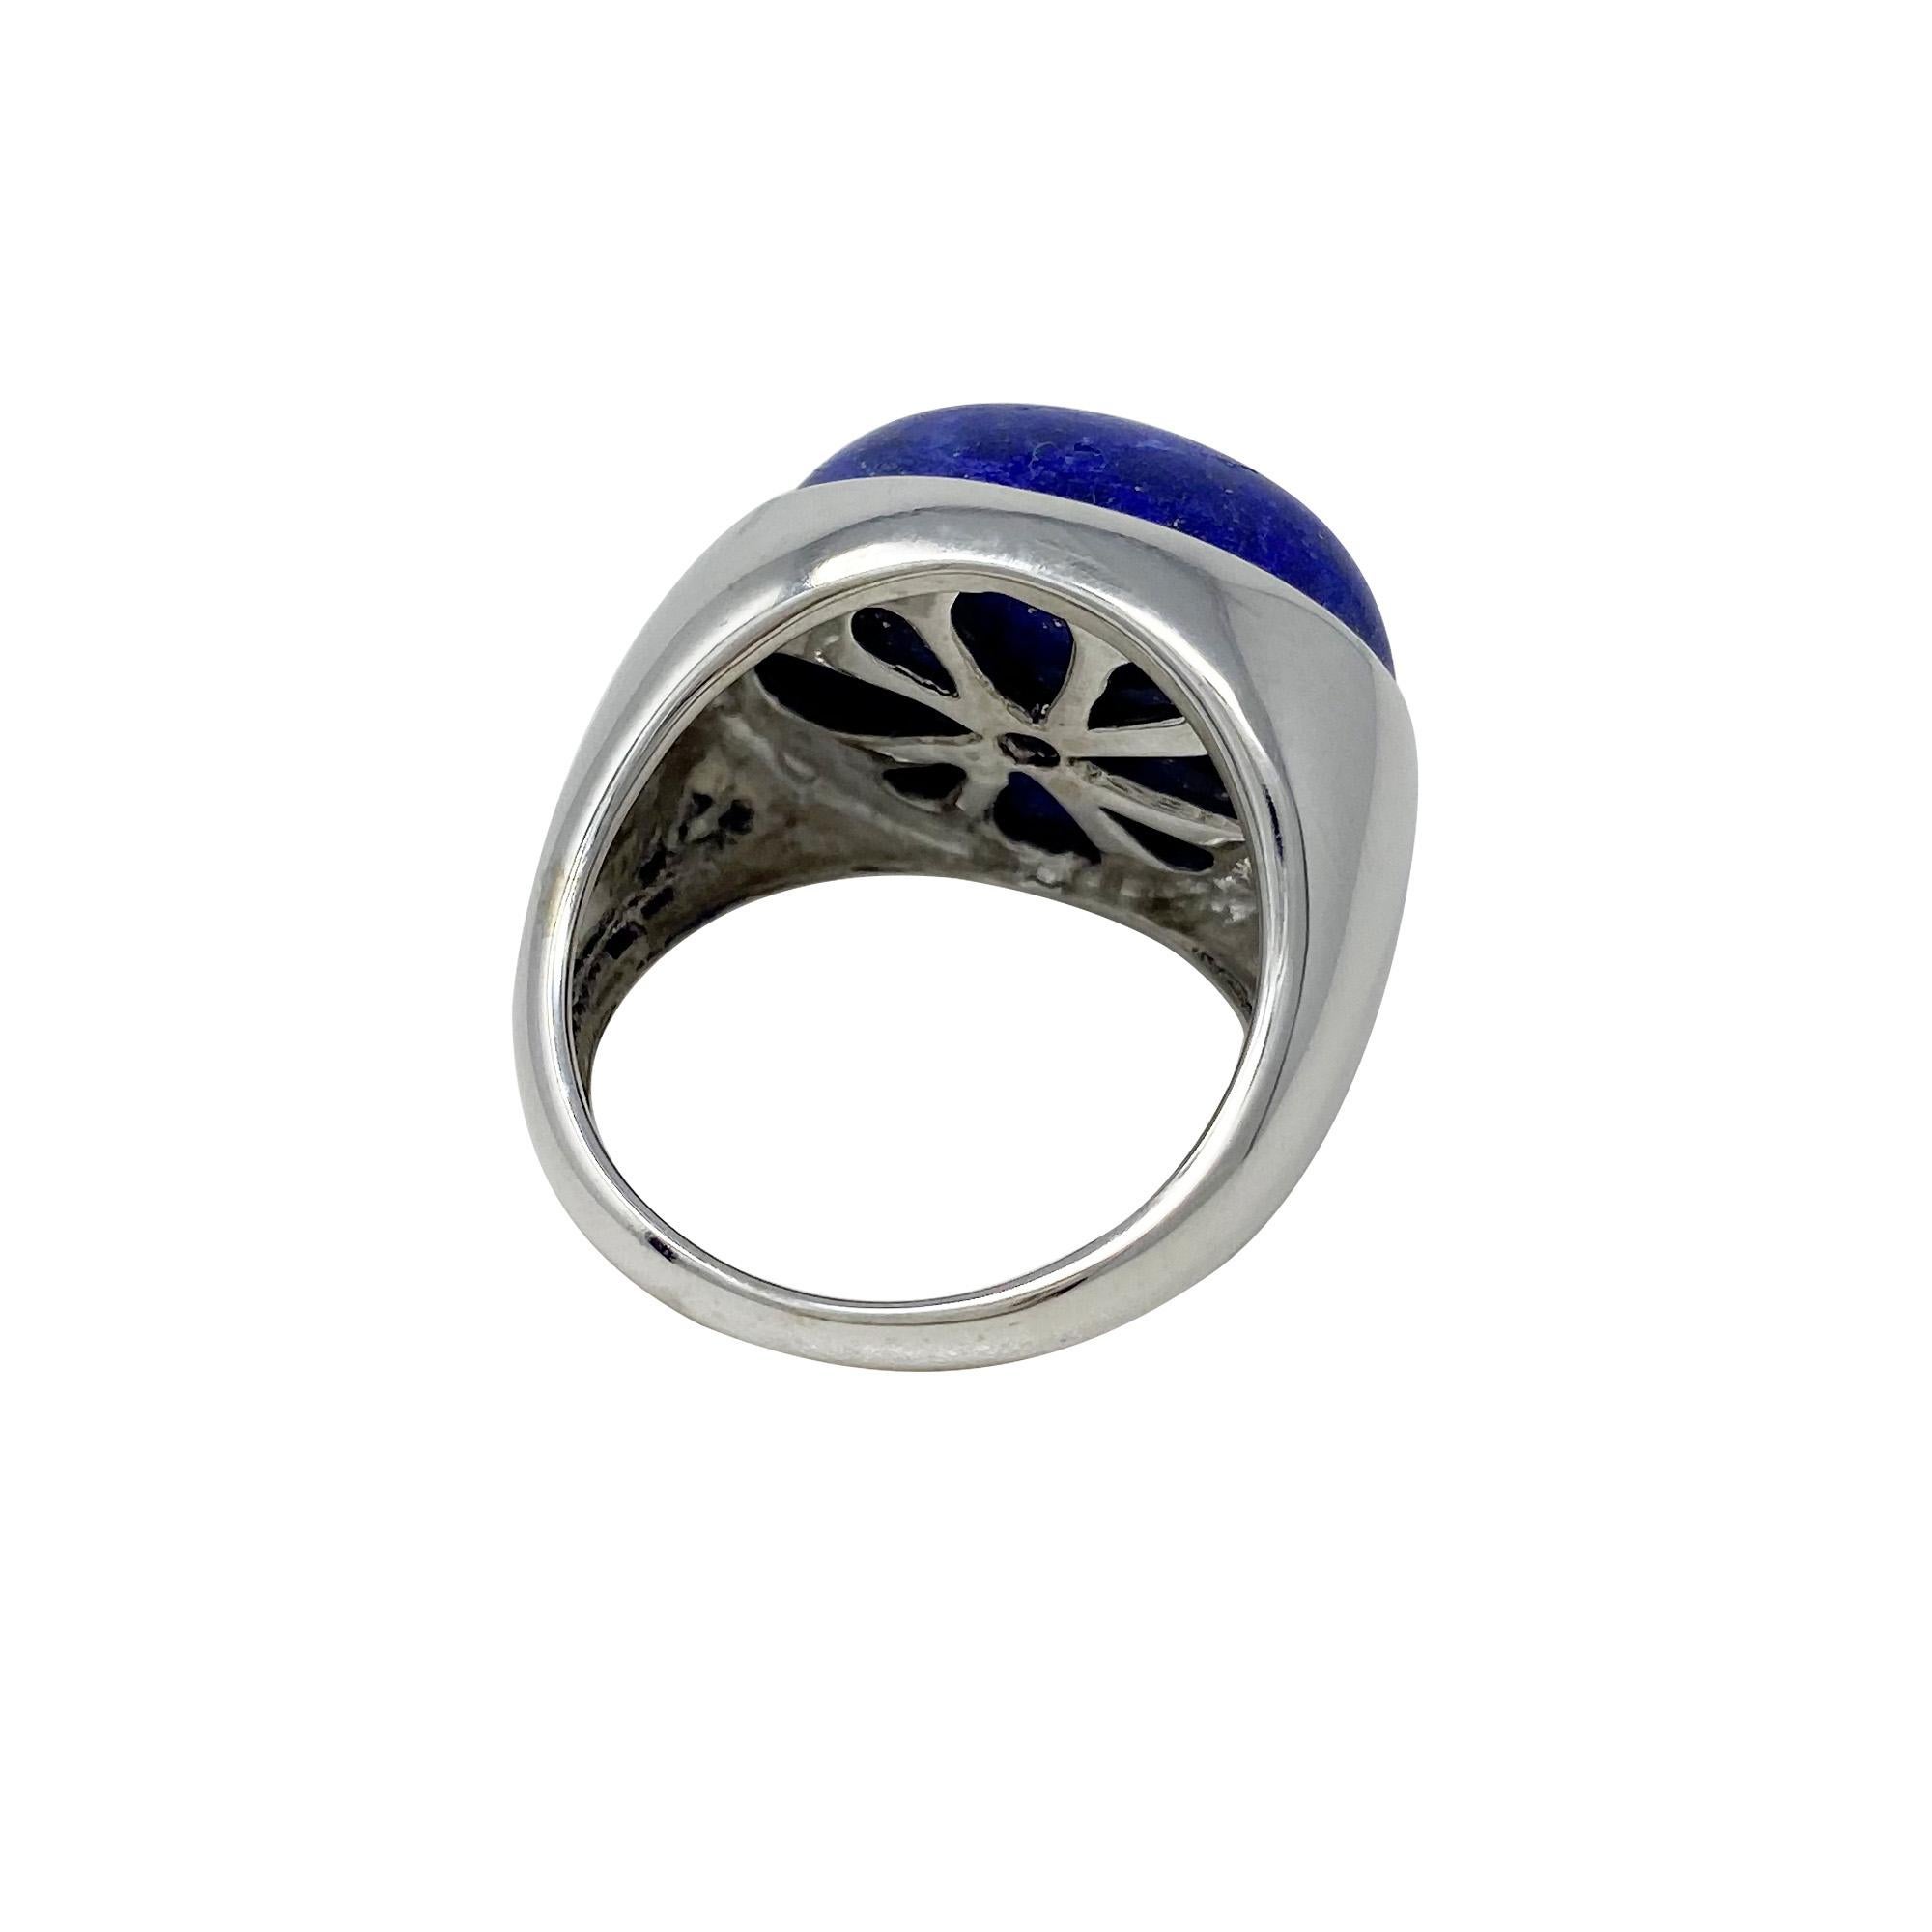 The oval-shaped, cabochon-cut lapis lazuli is a lovely shade of blue and the 18 karat white gold mounting and the yellow pyrite in the stone go beautifully together!  Size 9 1/4